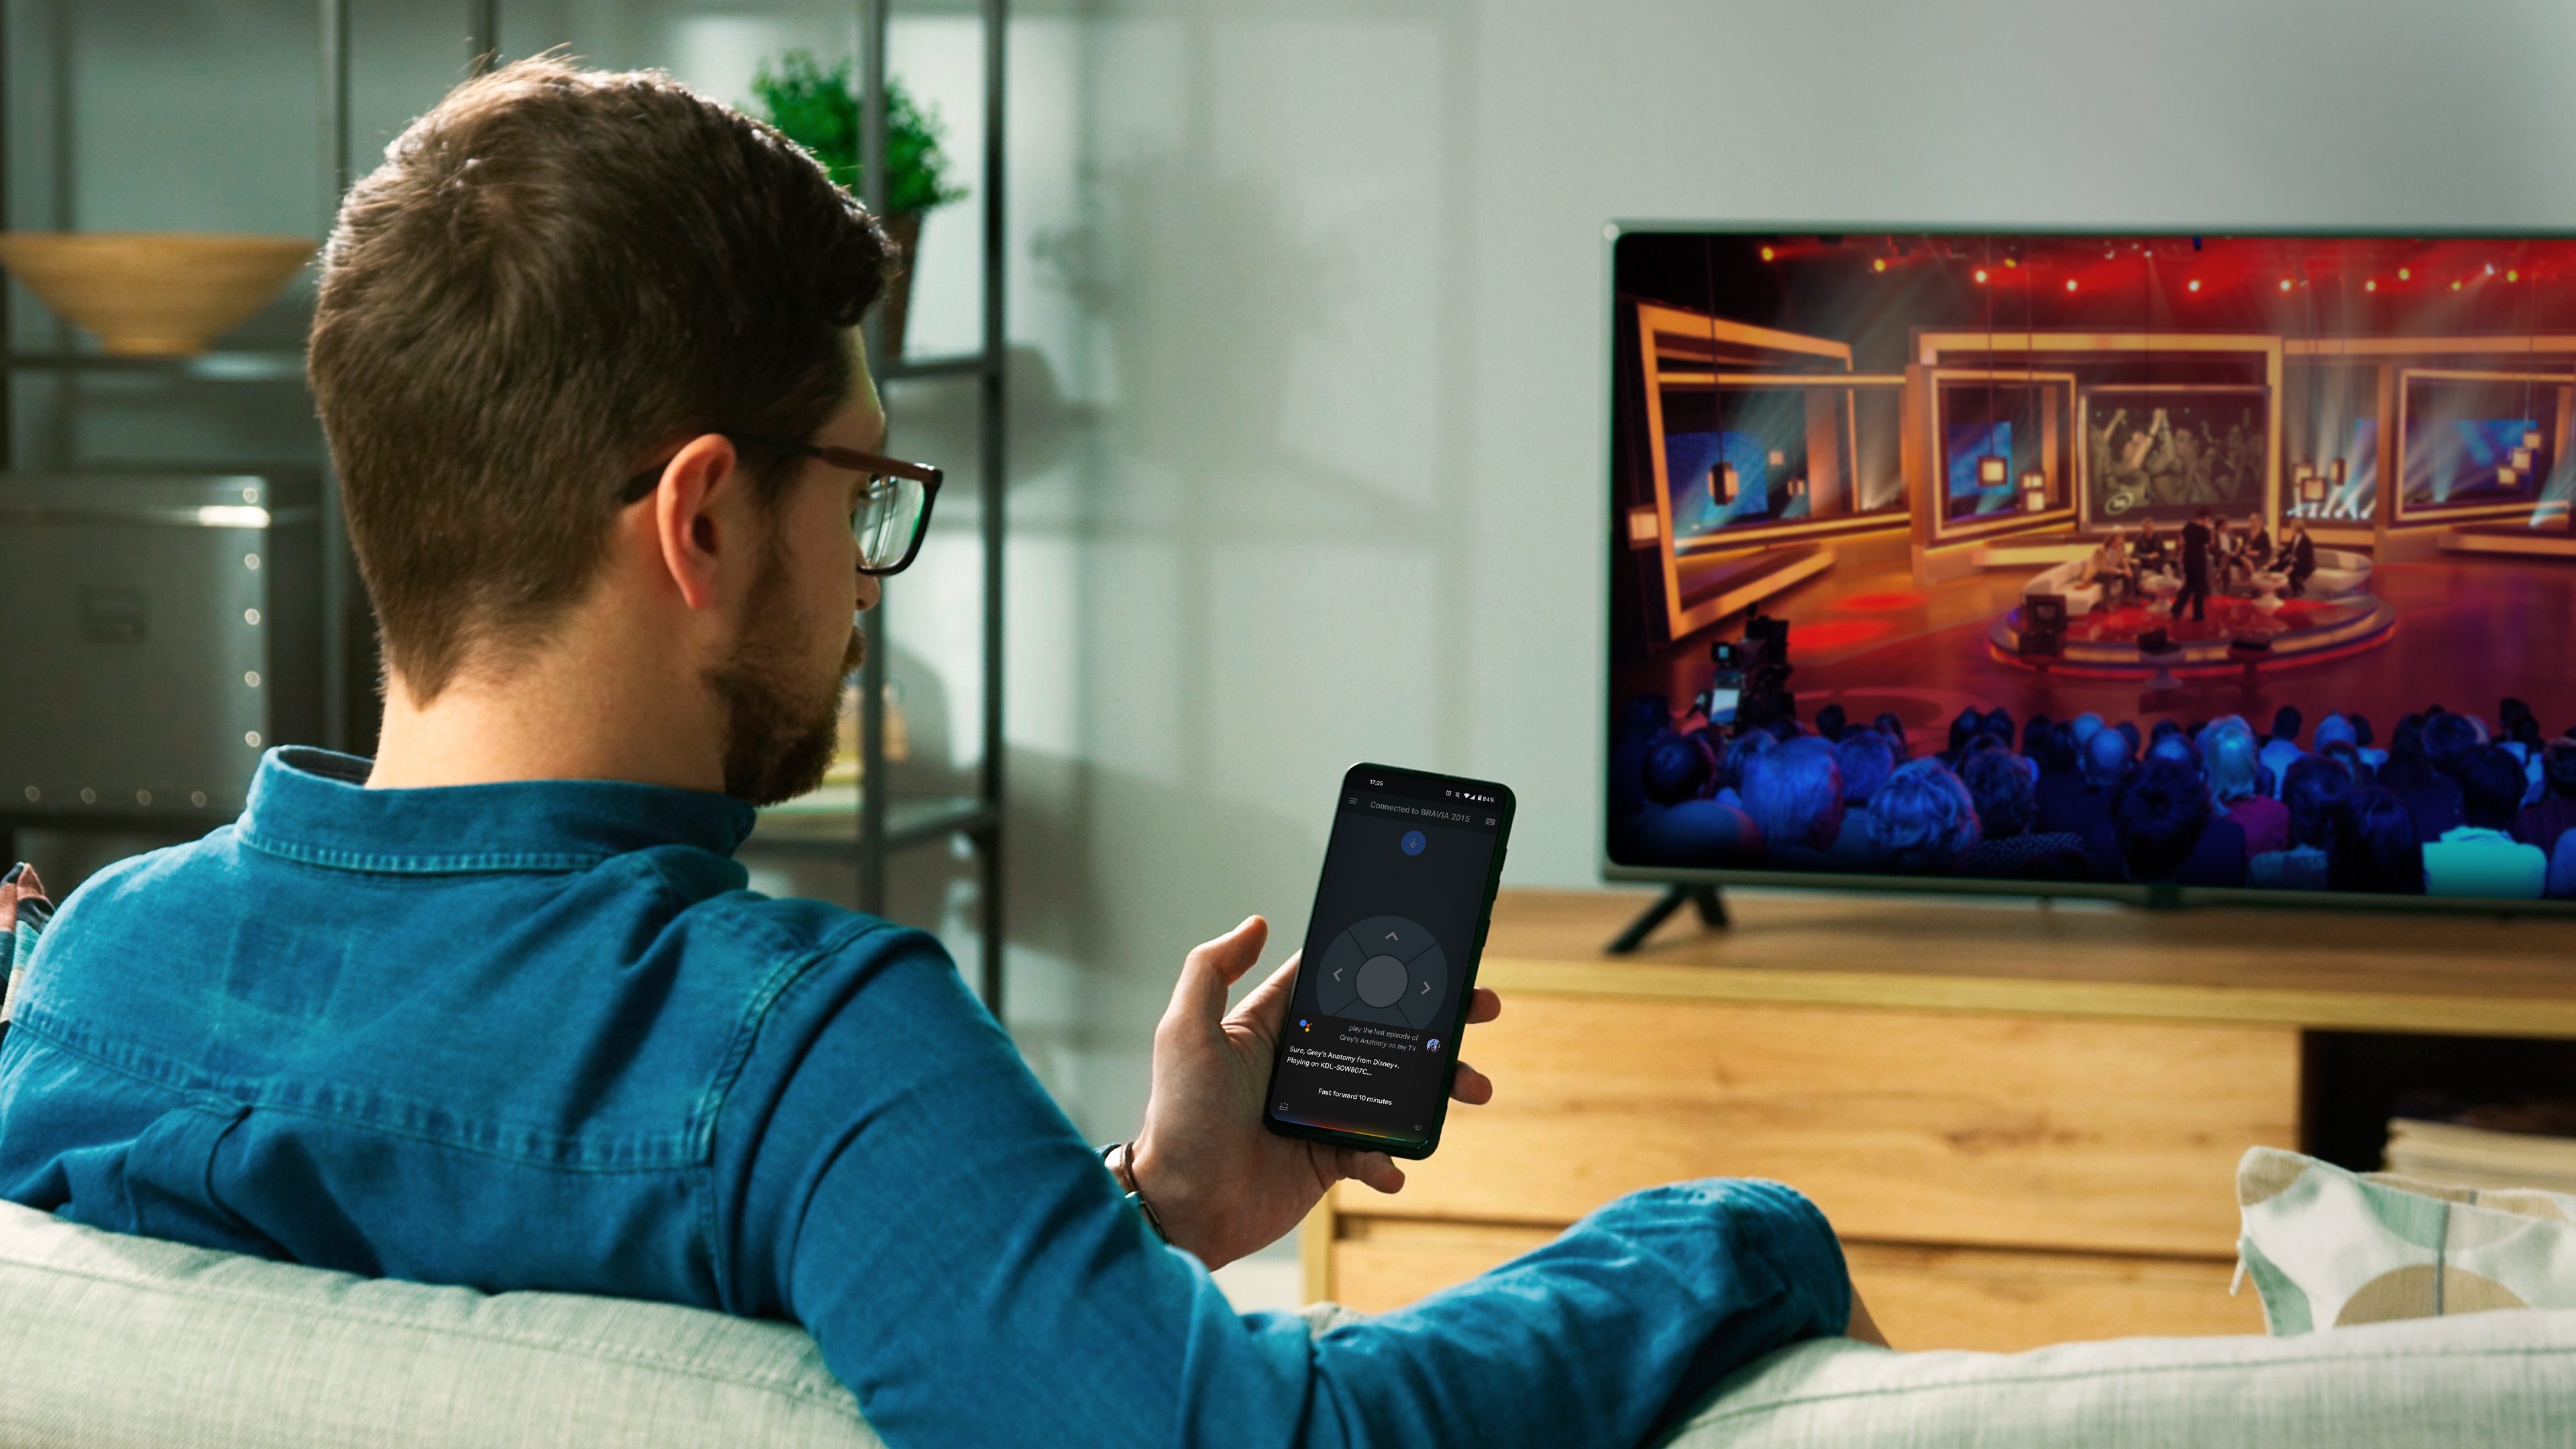 Google TV Vs Android TV: A Comparative Guide - Muvi One